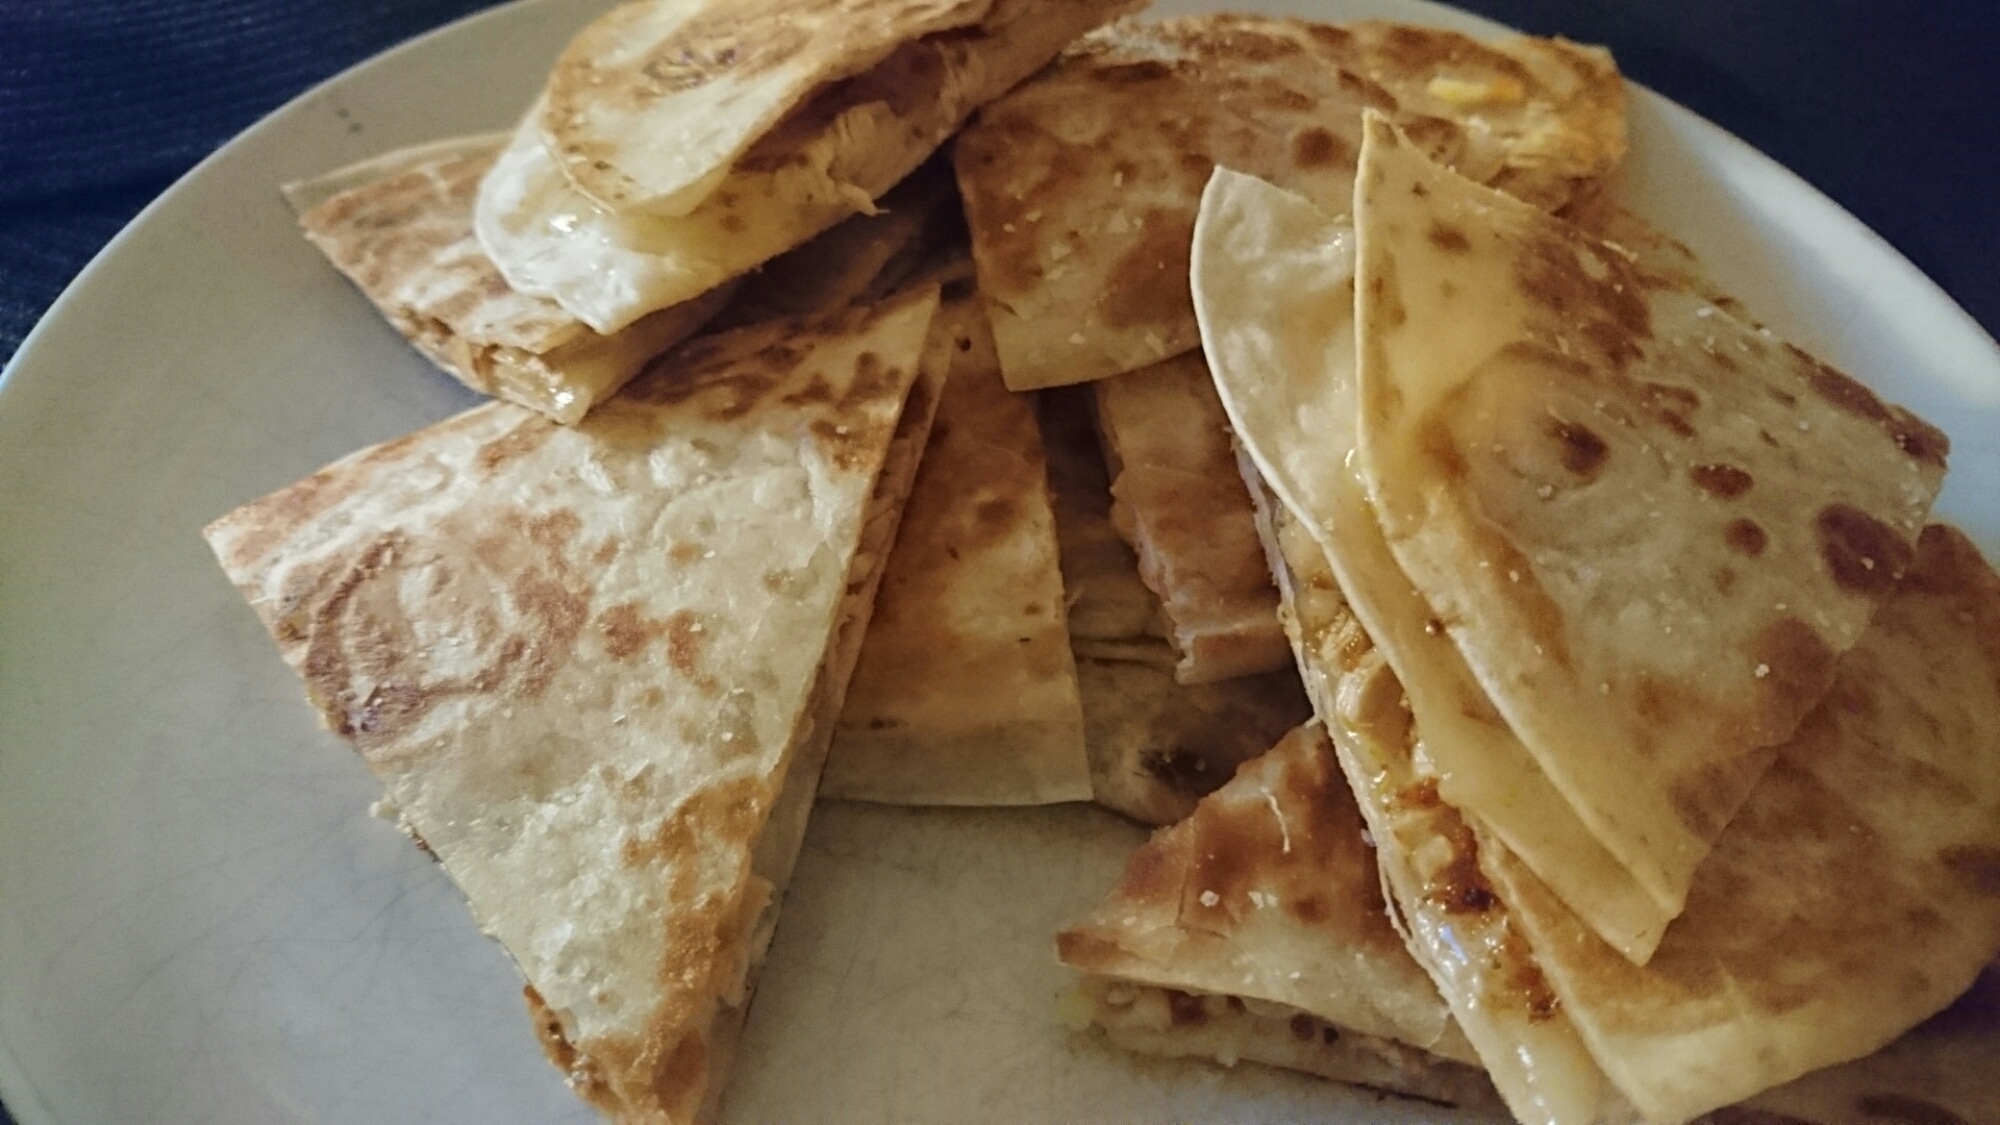 You are currently viewing Sonens restmiddag, quesadillas